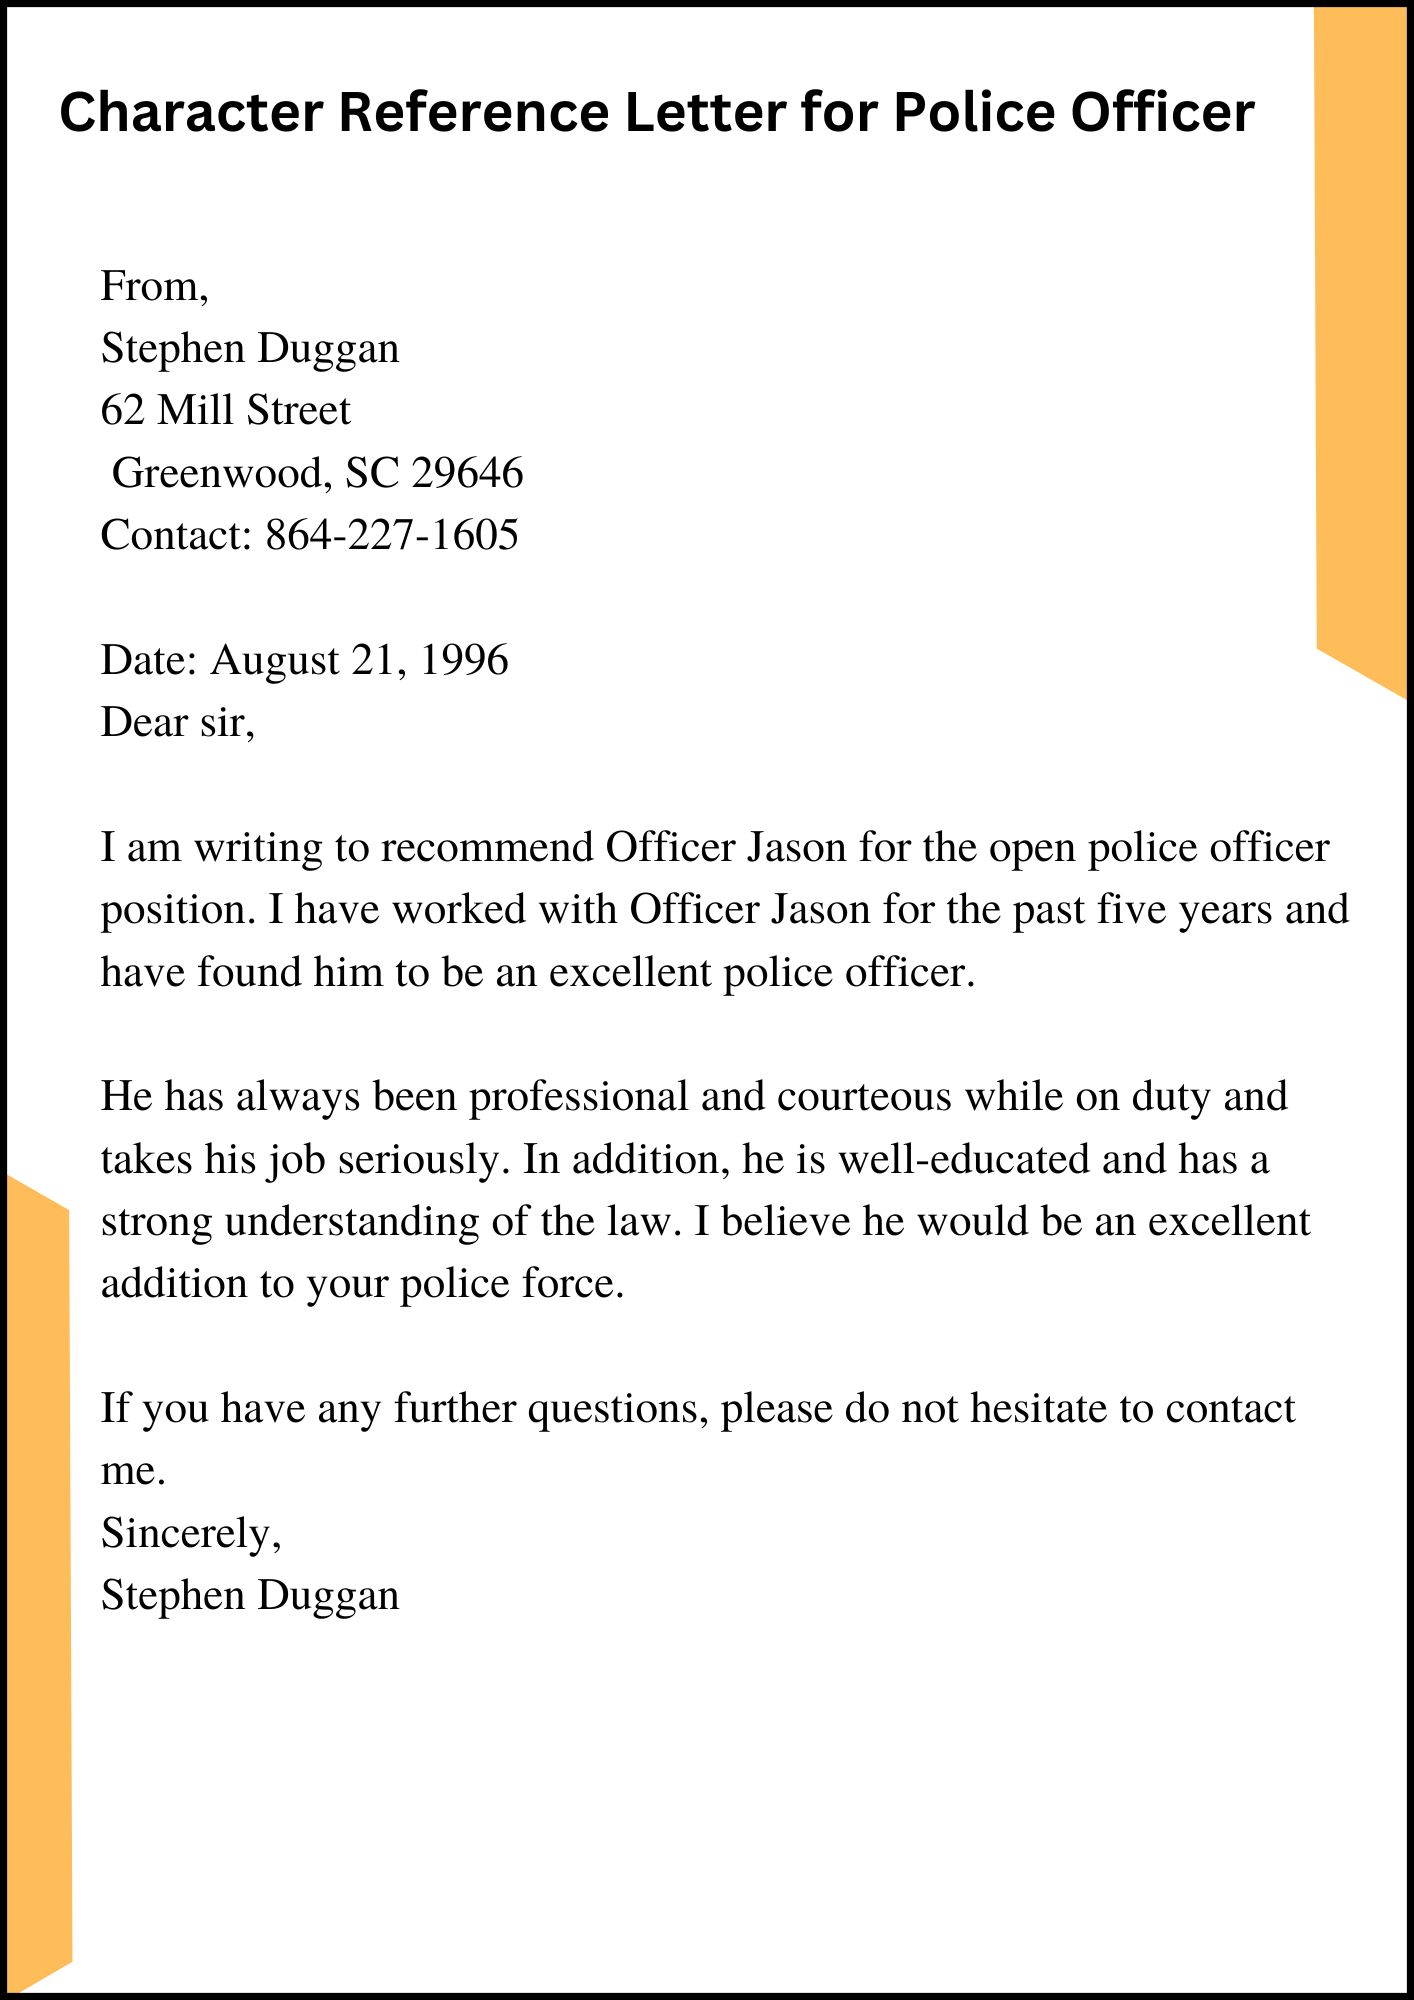 Sample Character Reference Letter For Police Officer 